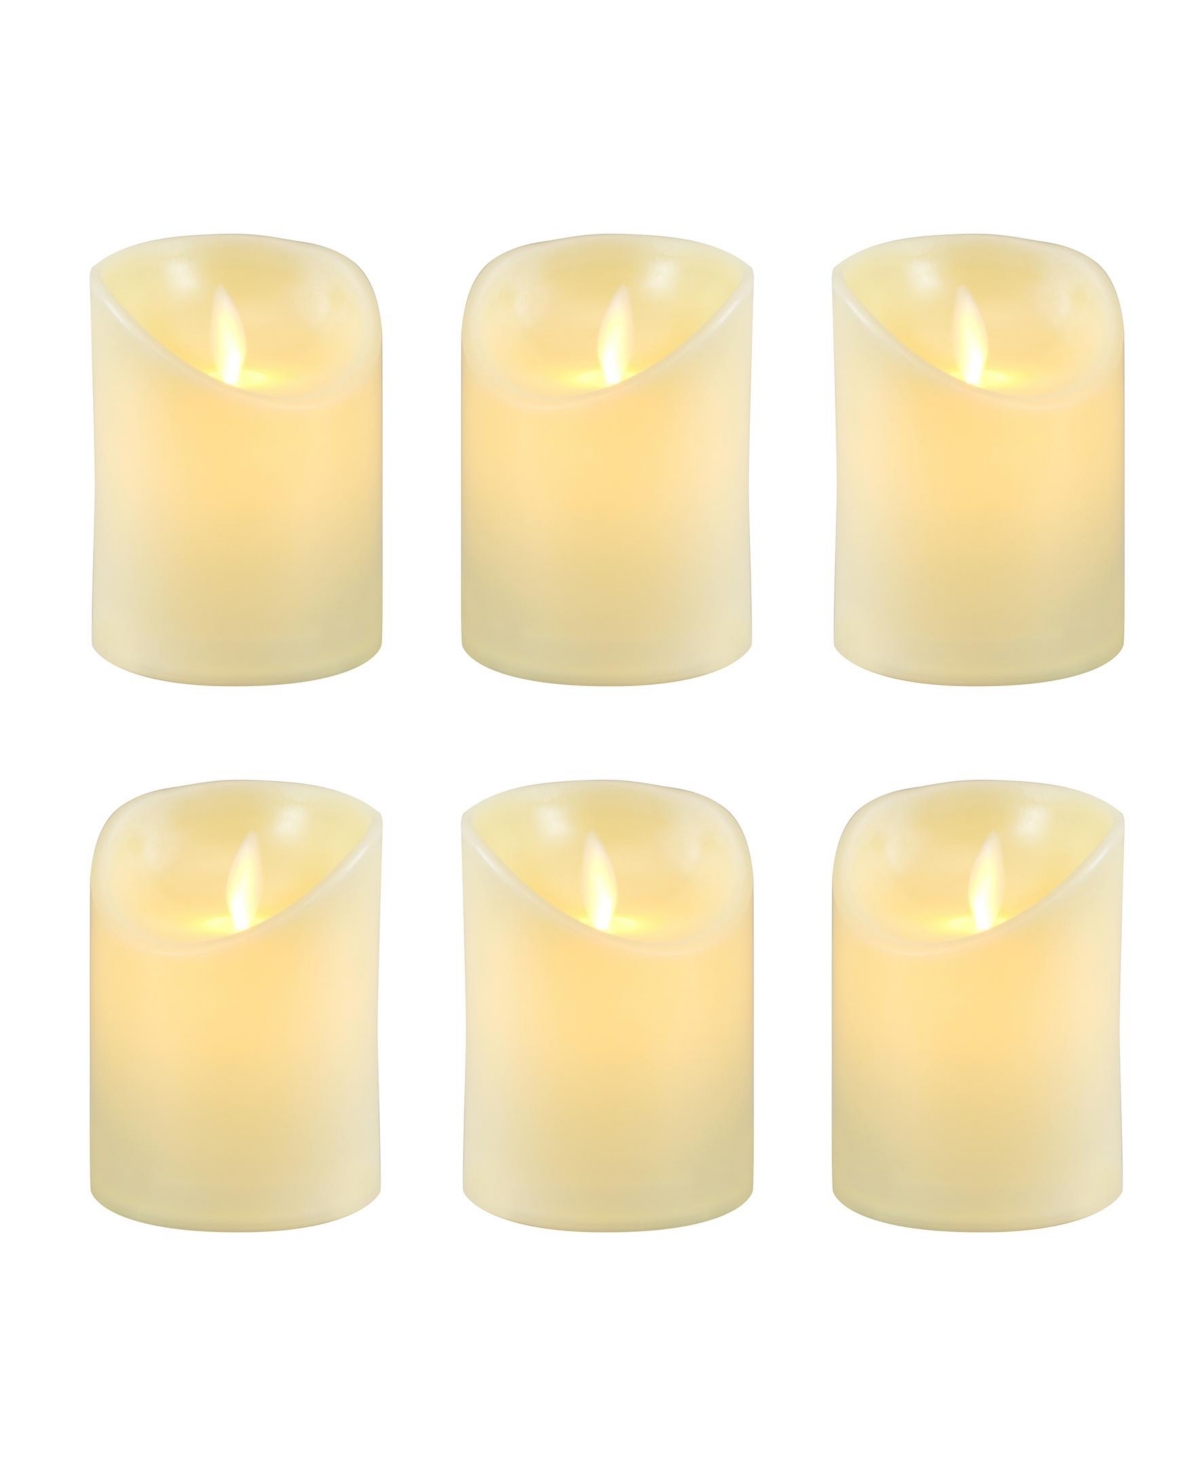 Battery Operated Led Votive with Moving Flame, Set of 6 - Cream